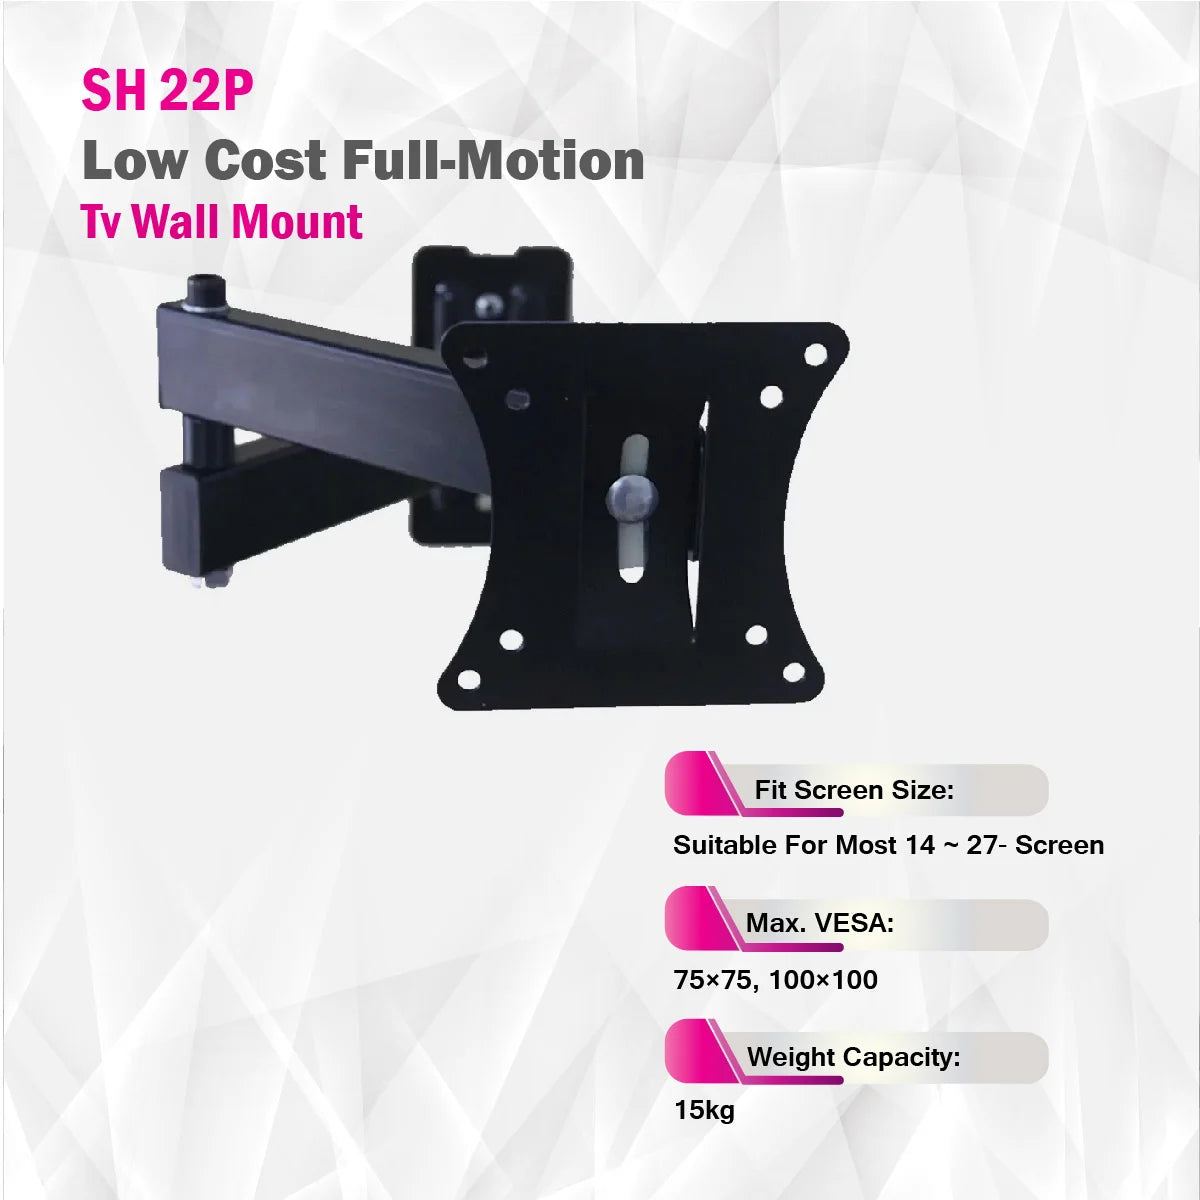 Skill Tech SH 22P - Low Cost Full-Motion Tv Wall Mount